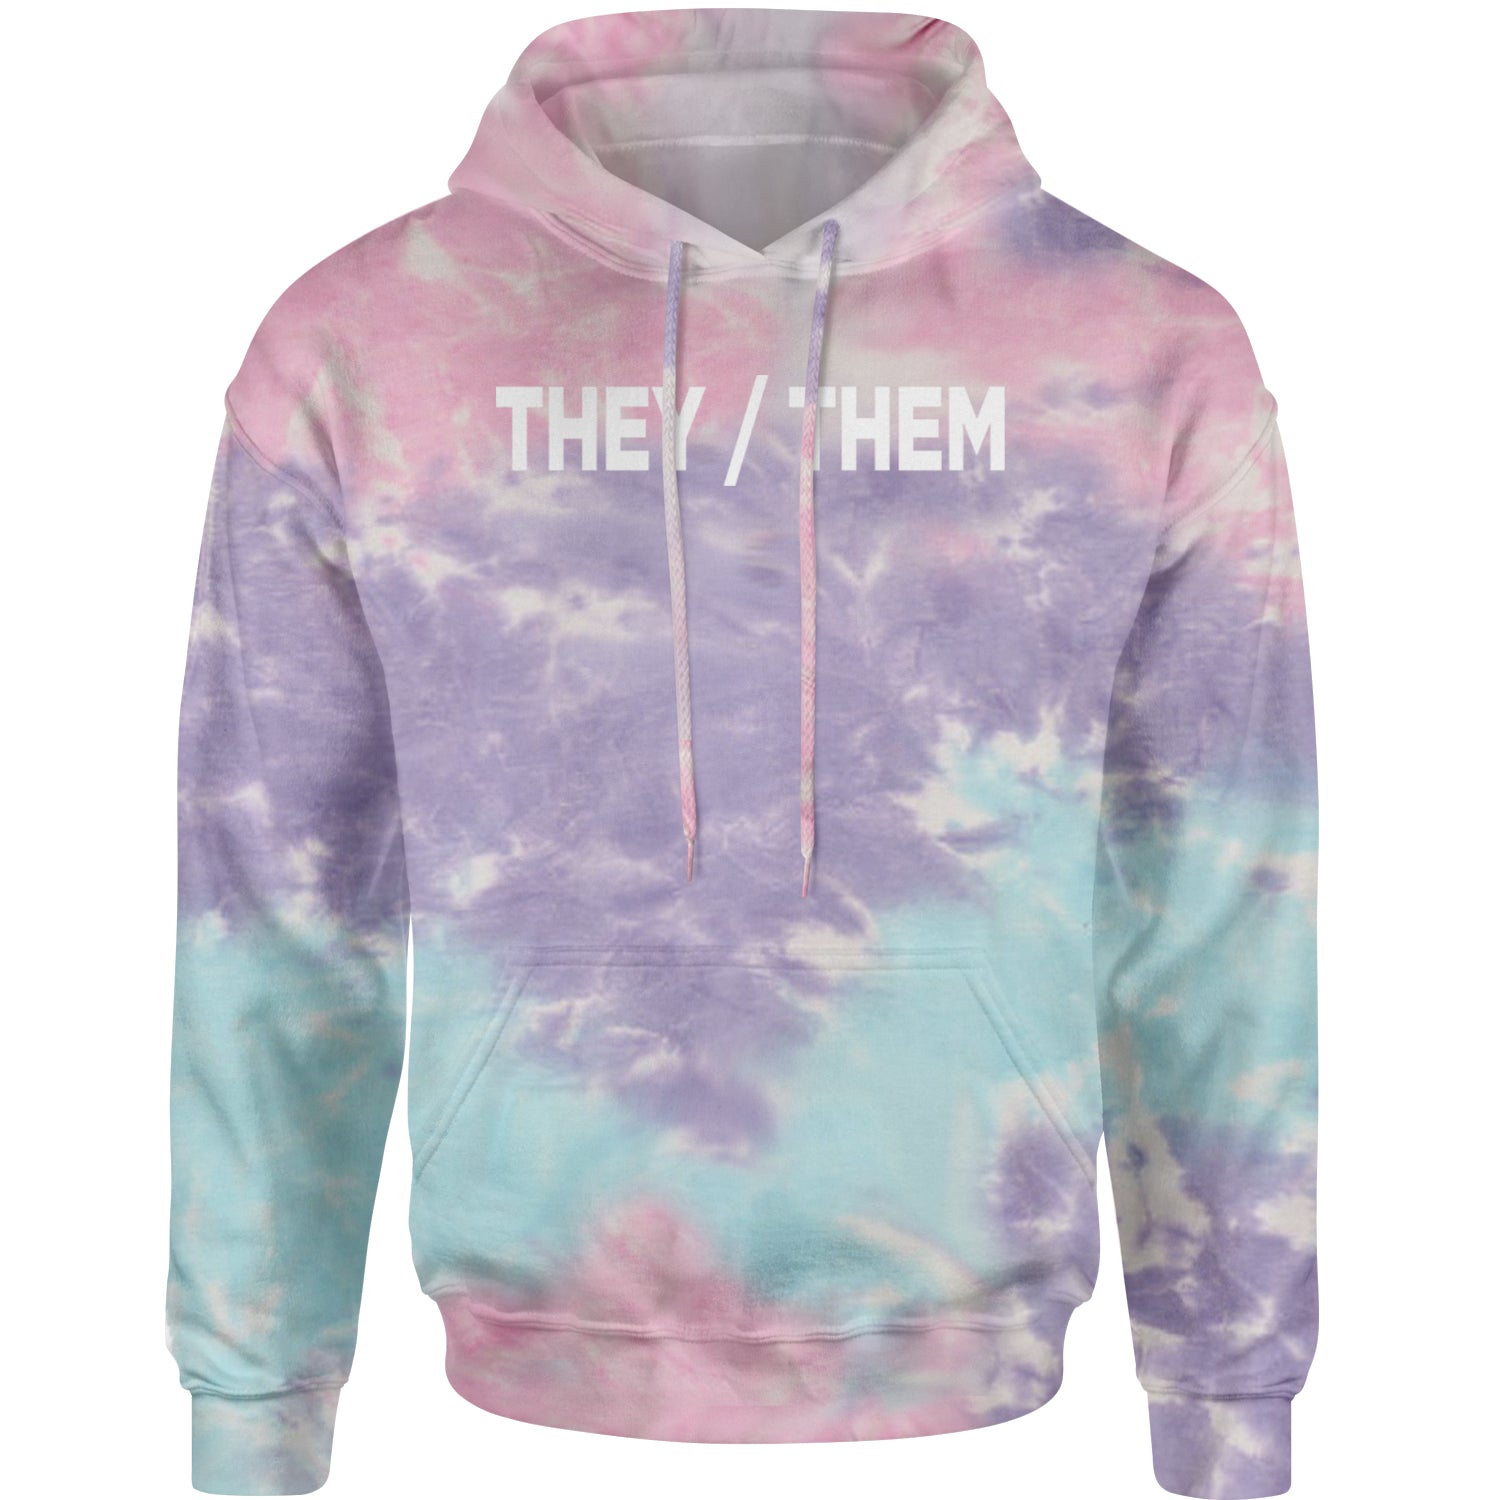 They Them Gender Pronouns Diversity and Inclusion Adult Hoodie Sweatshirt binary, civil, gay, he, her, him, nonbinary, pride, rights, she, them, they by Expression Tees